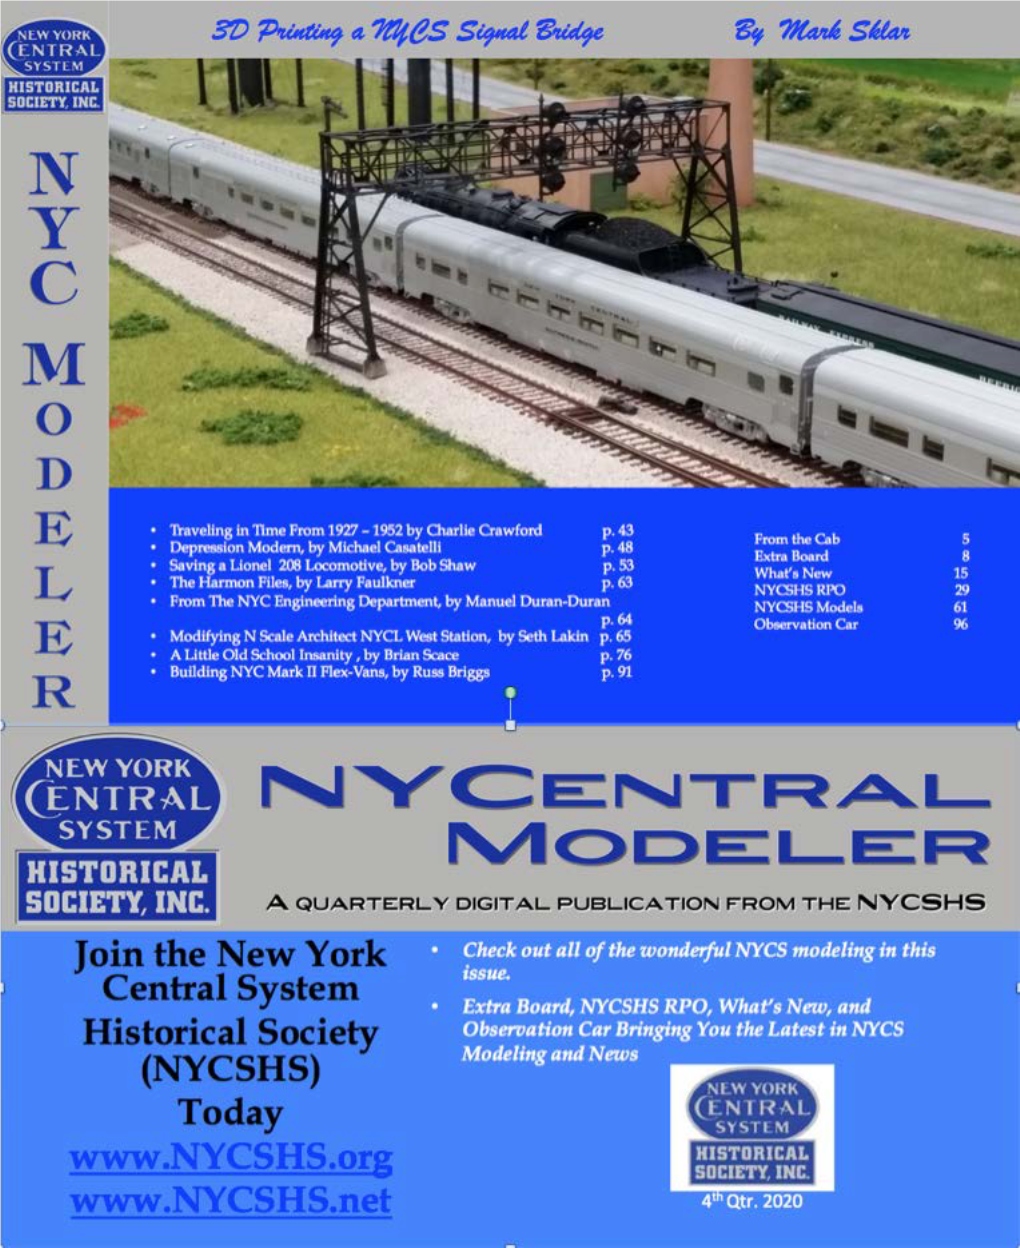 HO-Scale, N-Scale, and O-Scale Models and Are in the Process of Finding More HO-, N-, S-, and Even O–Scale Models to Be Released in Coming Months